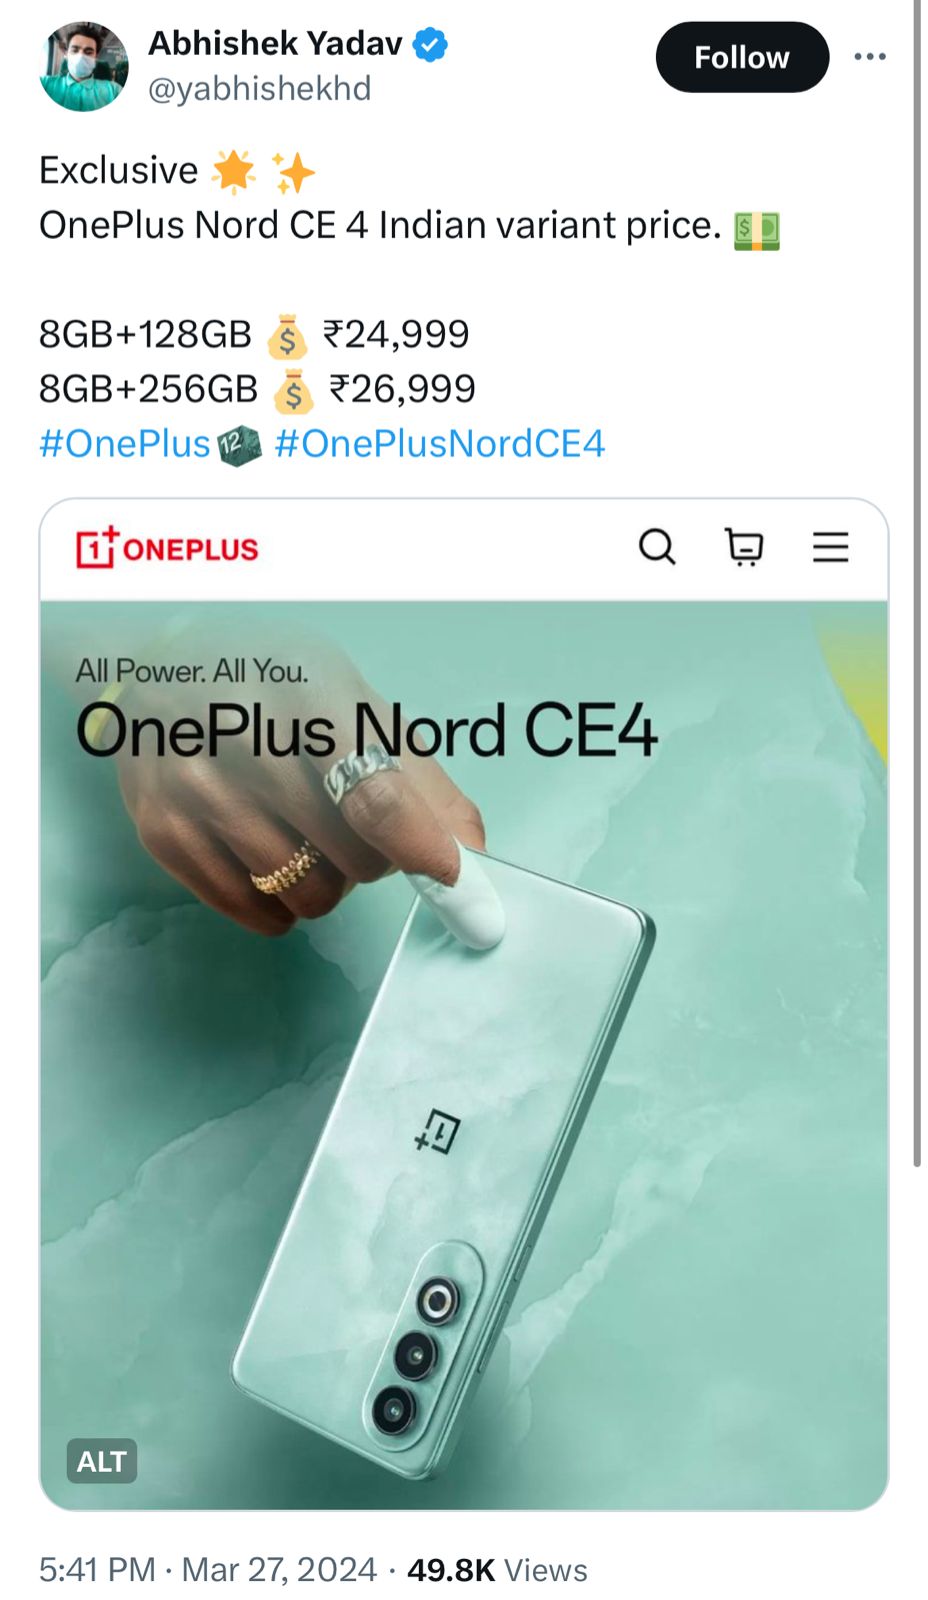 OnePlus Nord CE 4: Expected Pricing